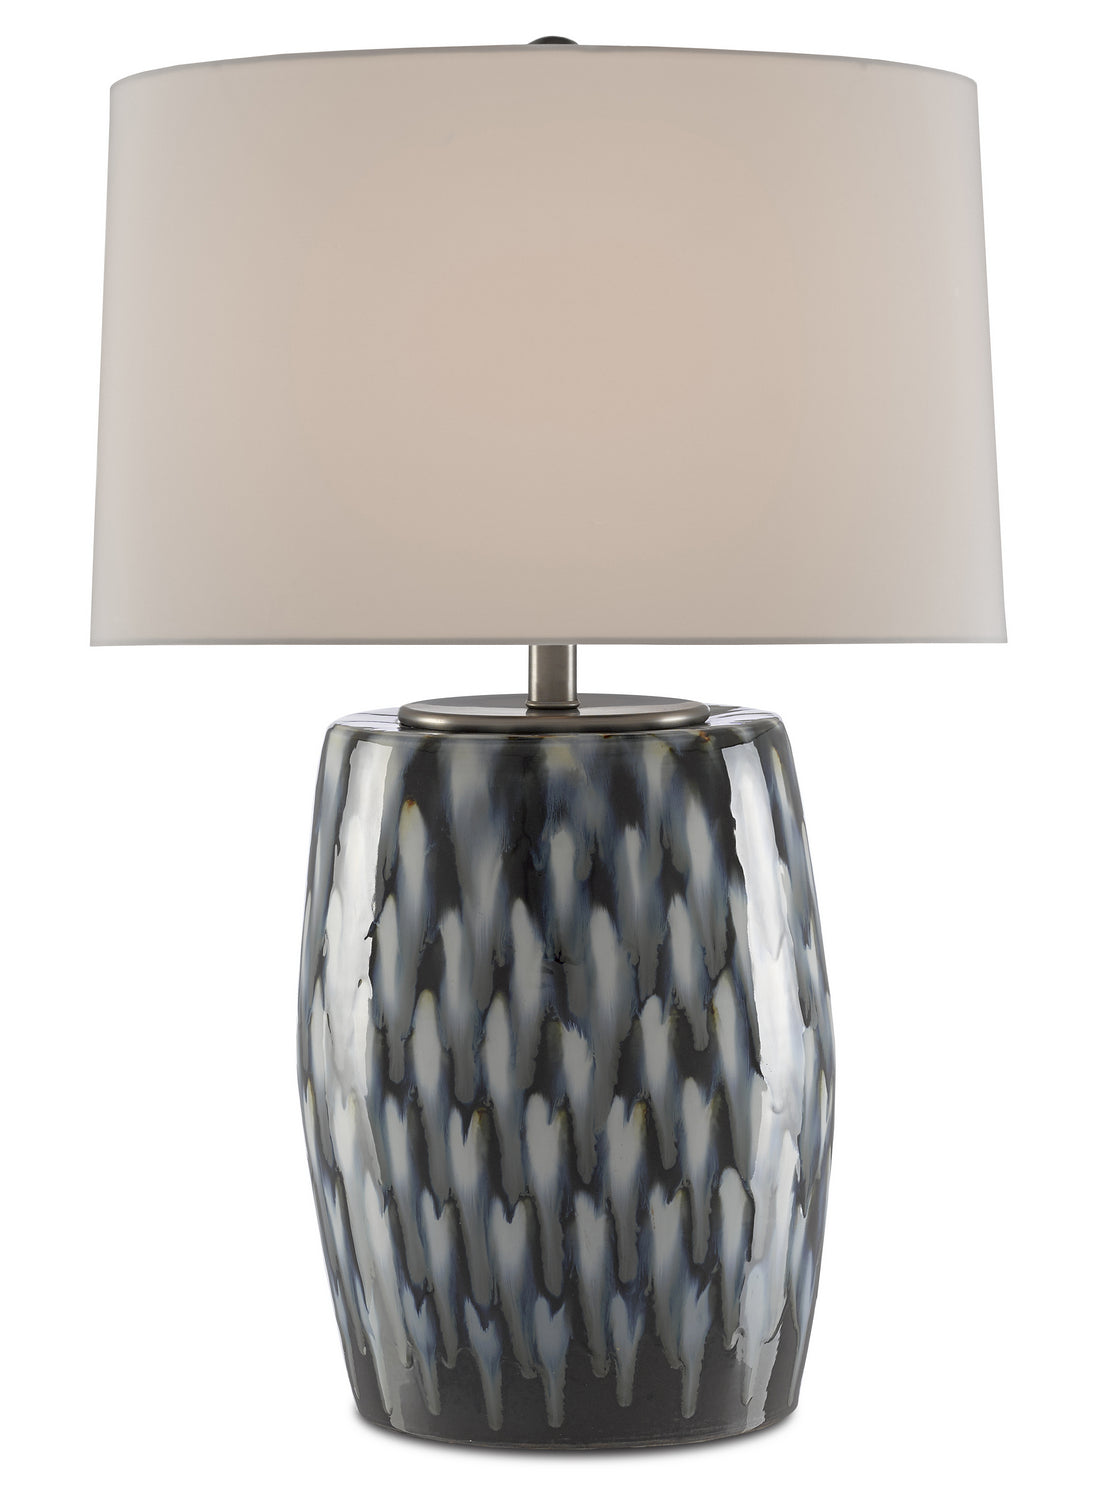 One Light Table Lamp from the Milner collection in Indigo/Cloud finish